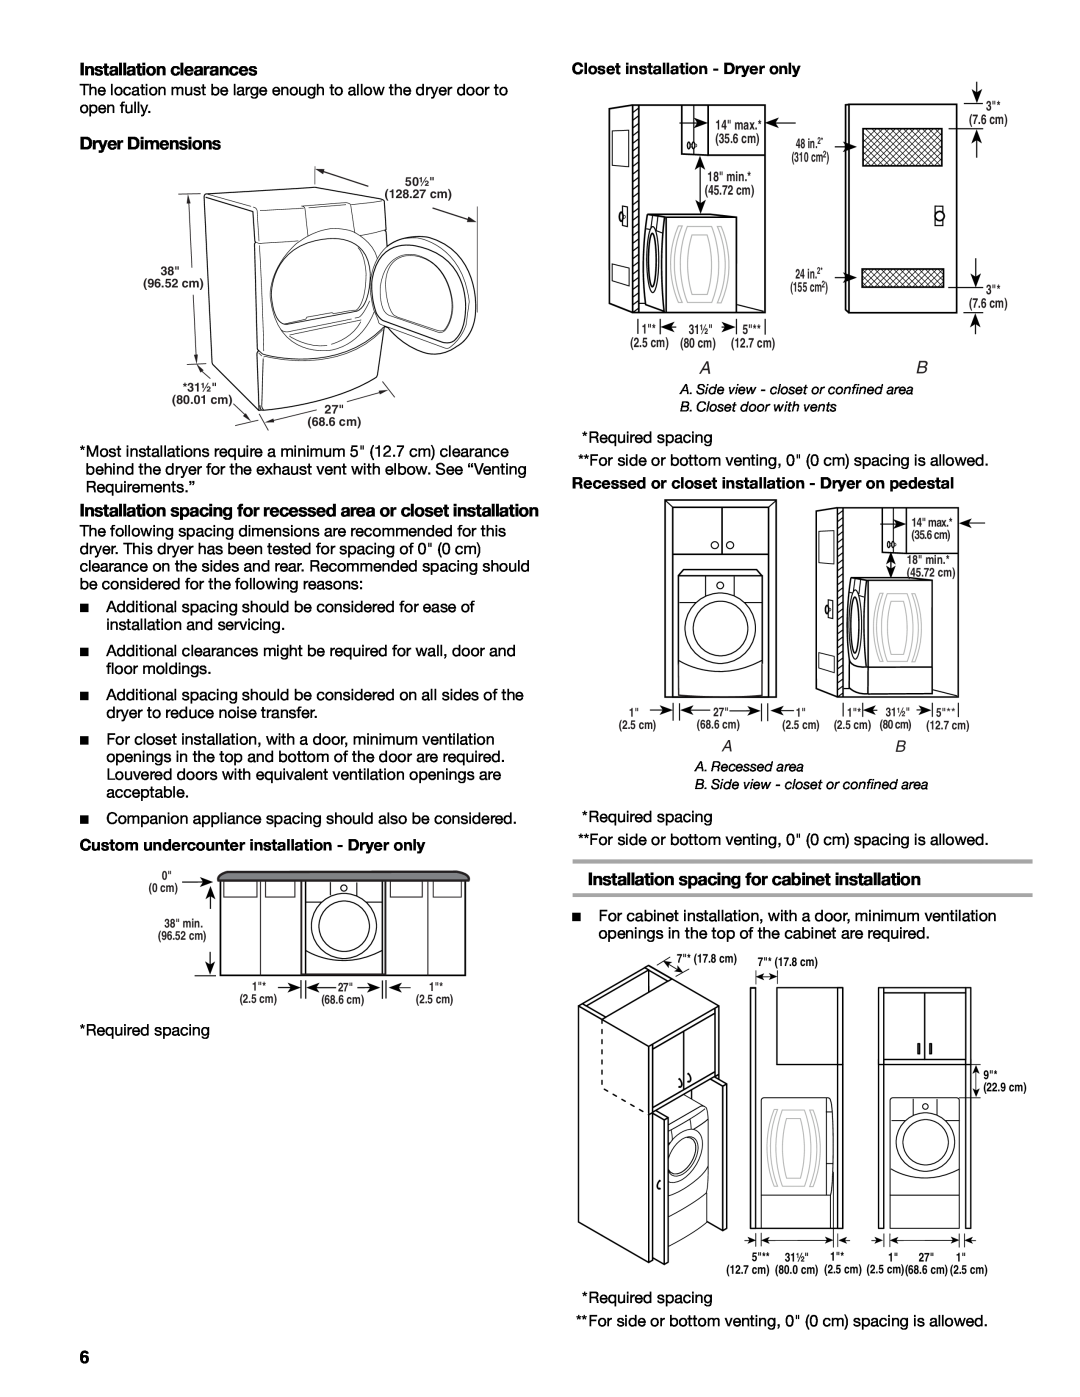 Sears 9709 manual Installation clearances, Dryer Dimensions, Installation spacing for recessed area or closet installation 